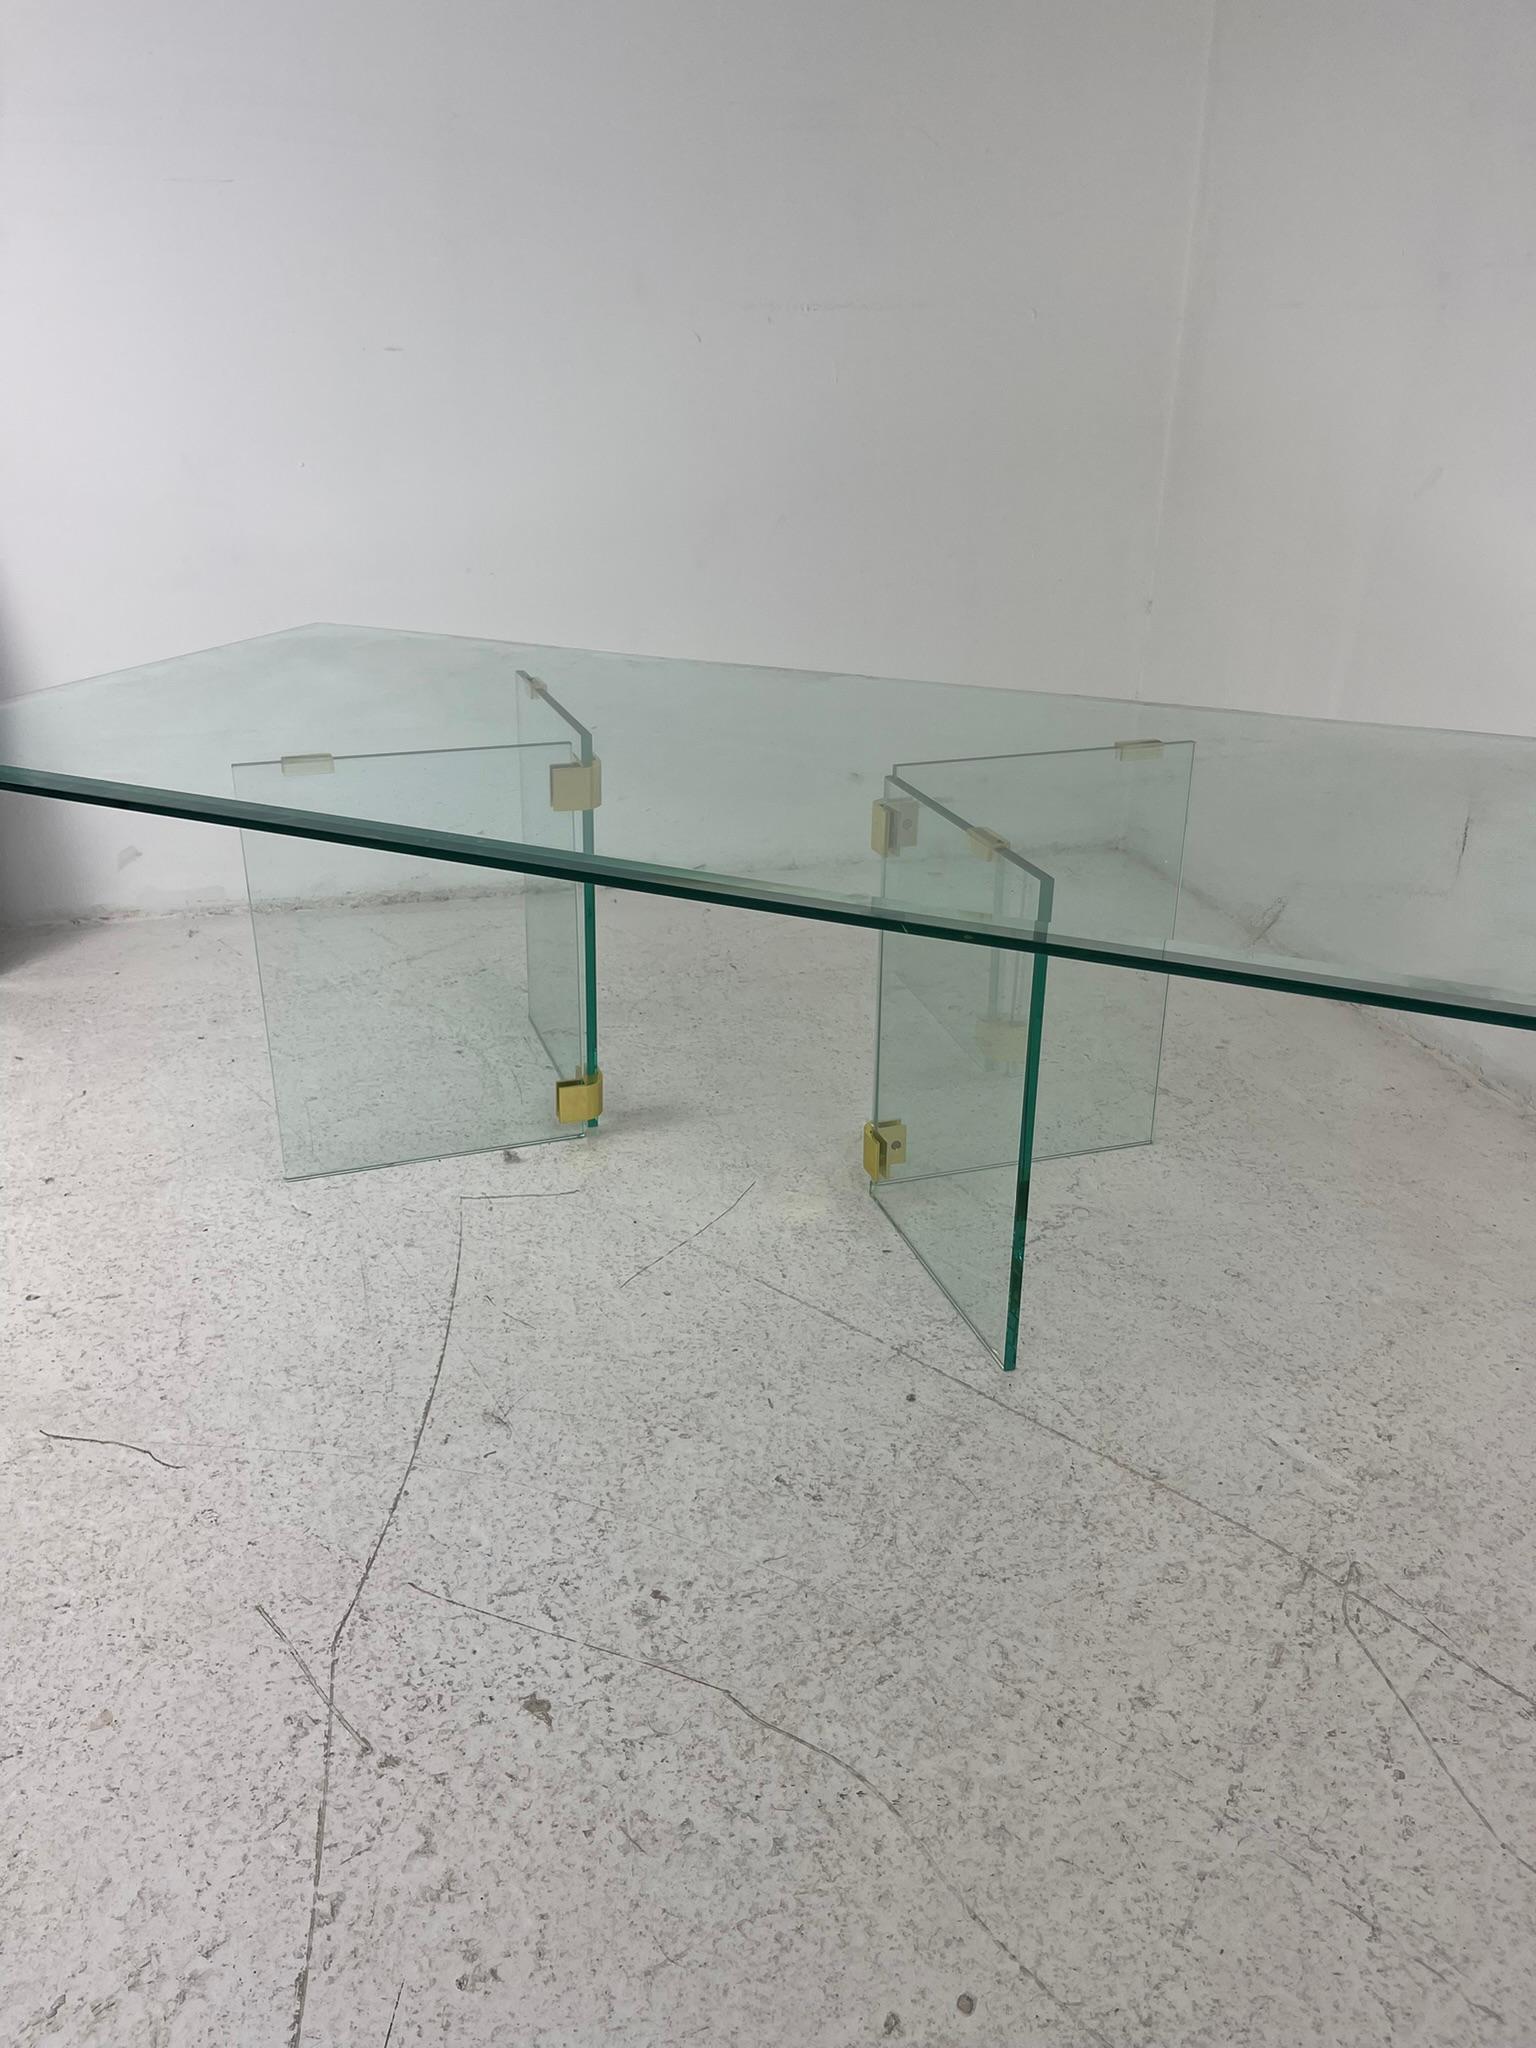 Disco chic coffee table by Pace Collection. 2 glass and brass pillars create a sturdy foundation for heavy beveled rectangular glass and can be adjusted to desired look.

Bases have some minor chips to edges of glass, but no major cracks/breaks.